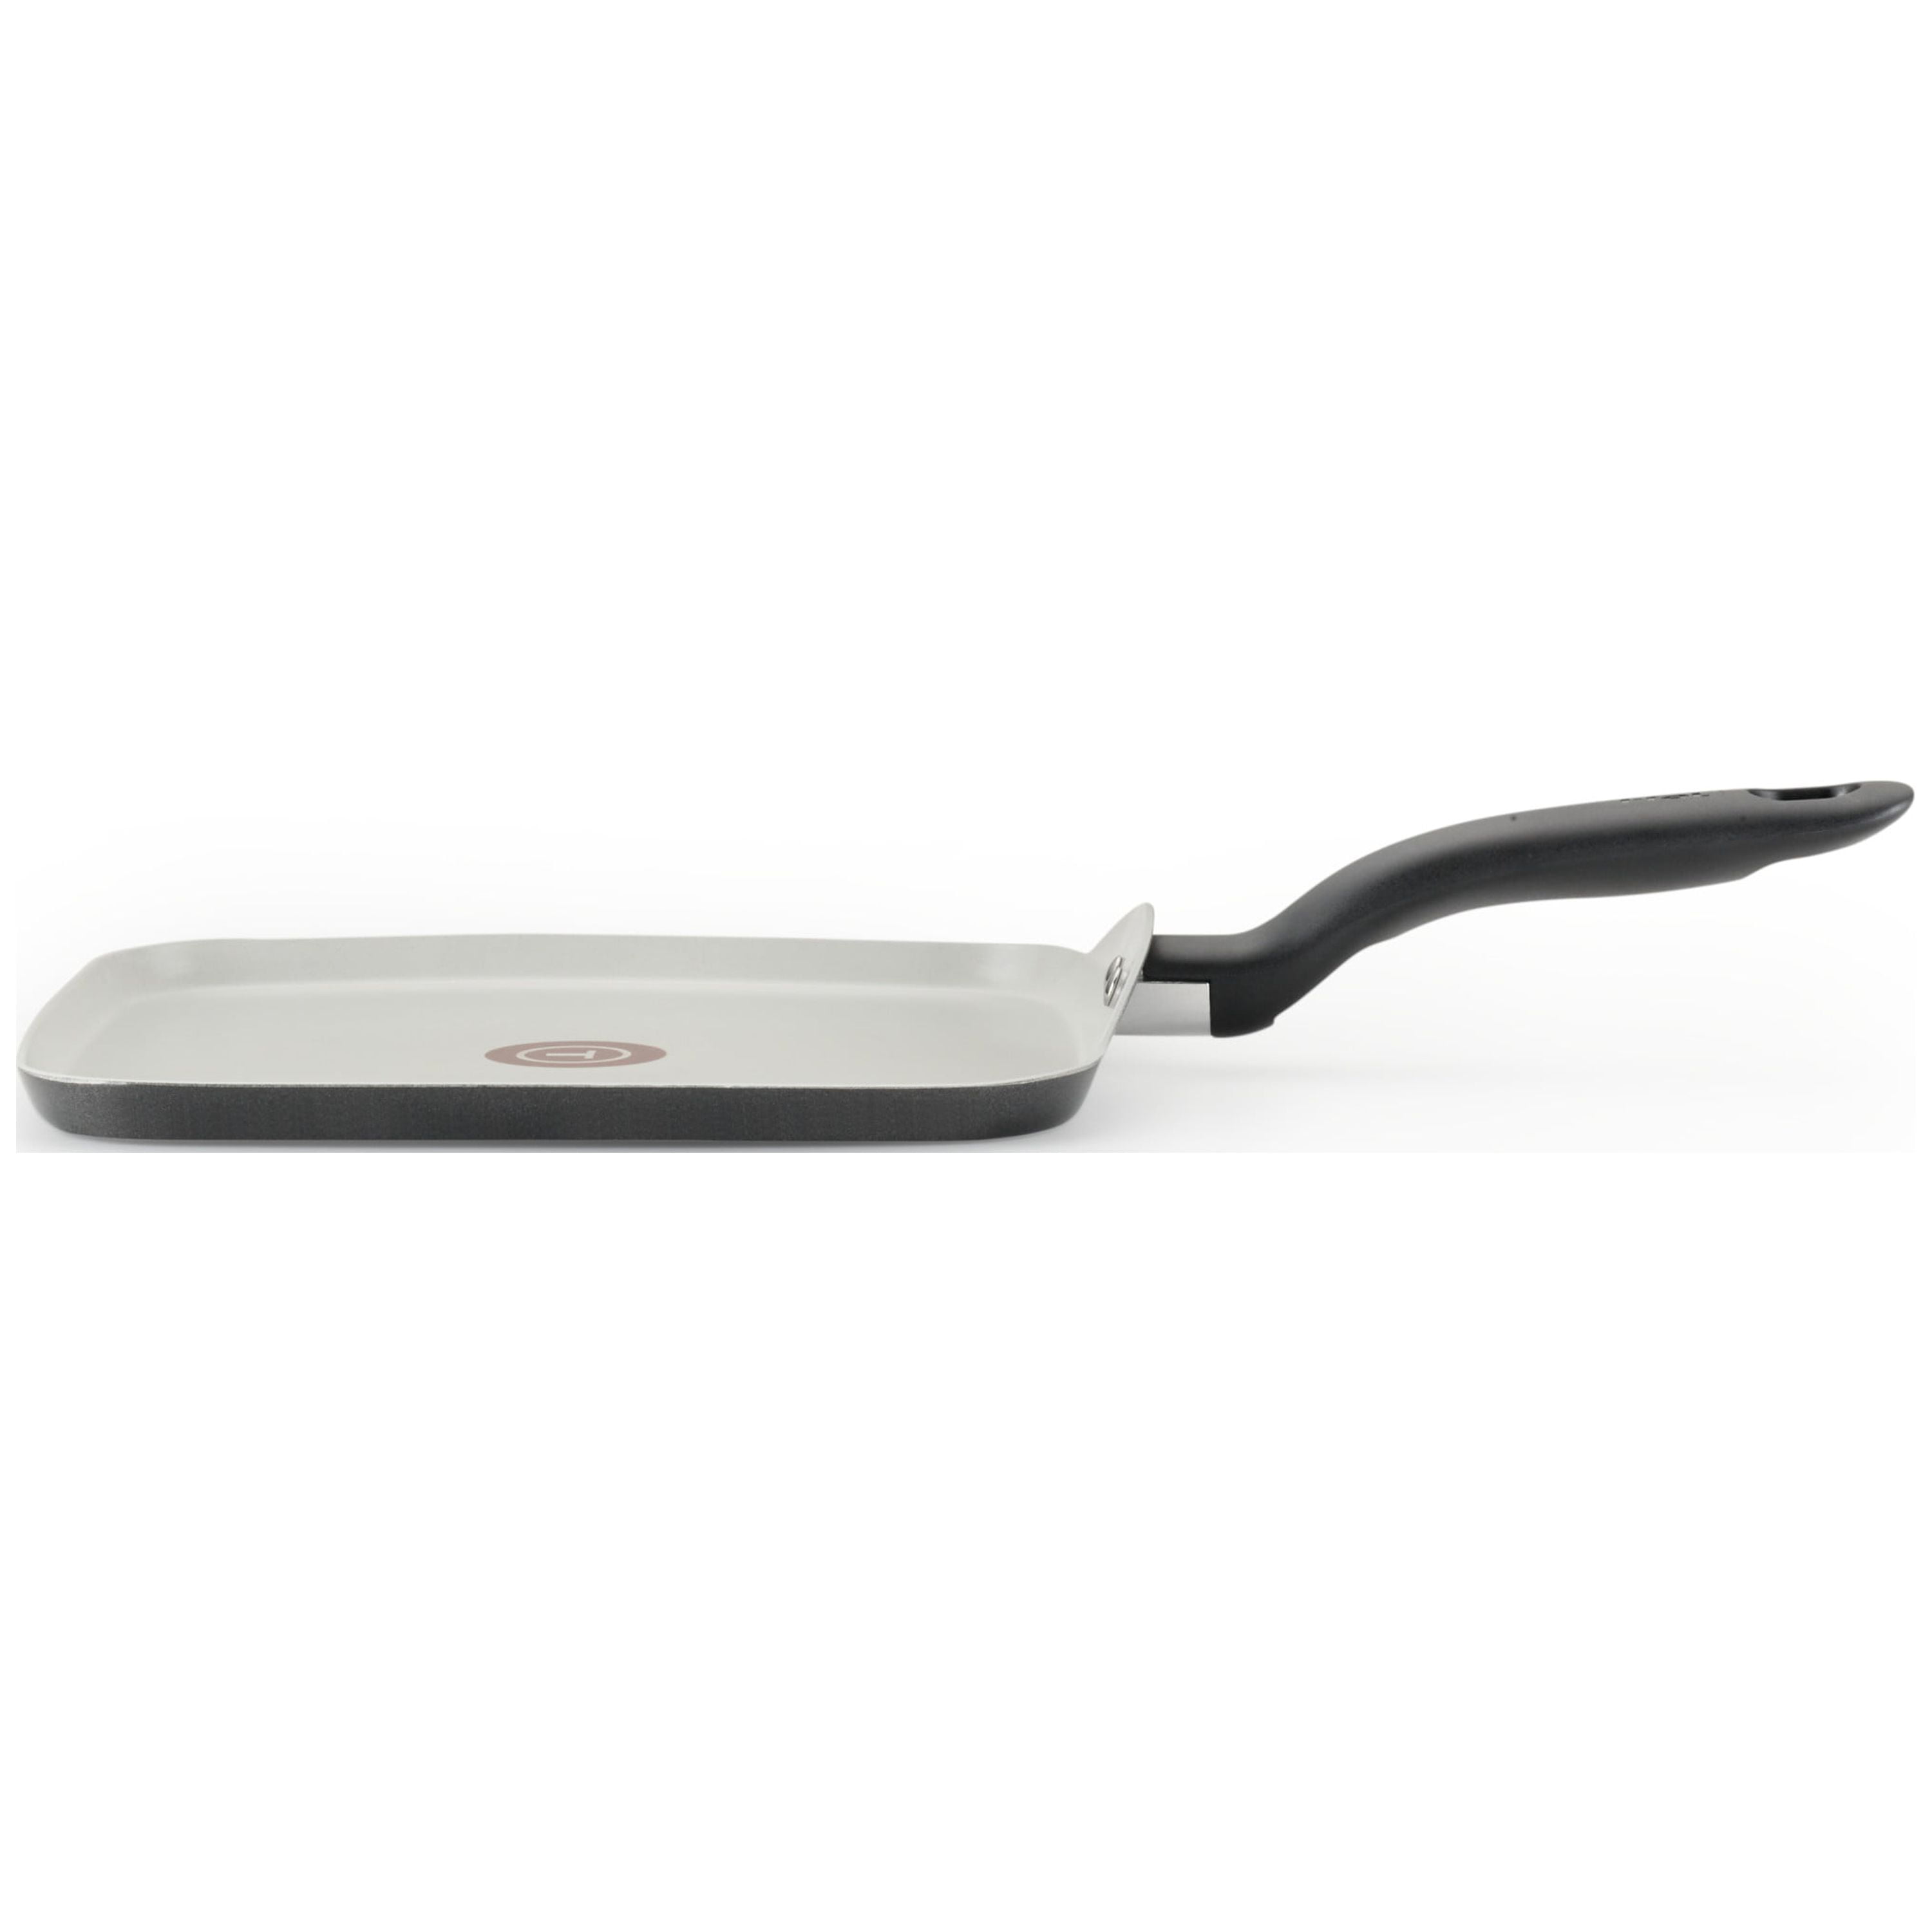 T-fal Specialty Ceramic Cookware, 10.25 Square Griddle, Black, G90013 